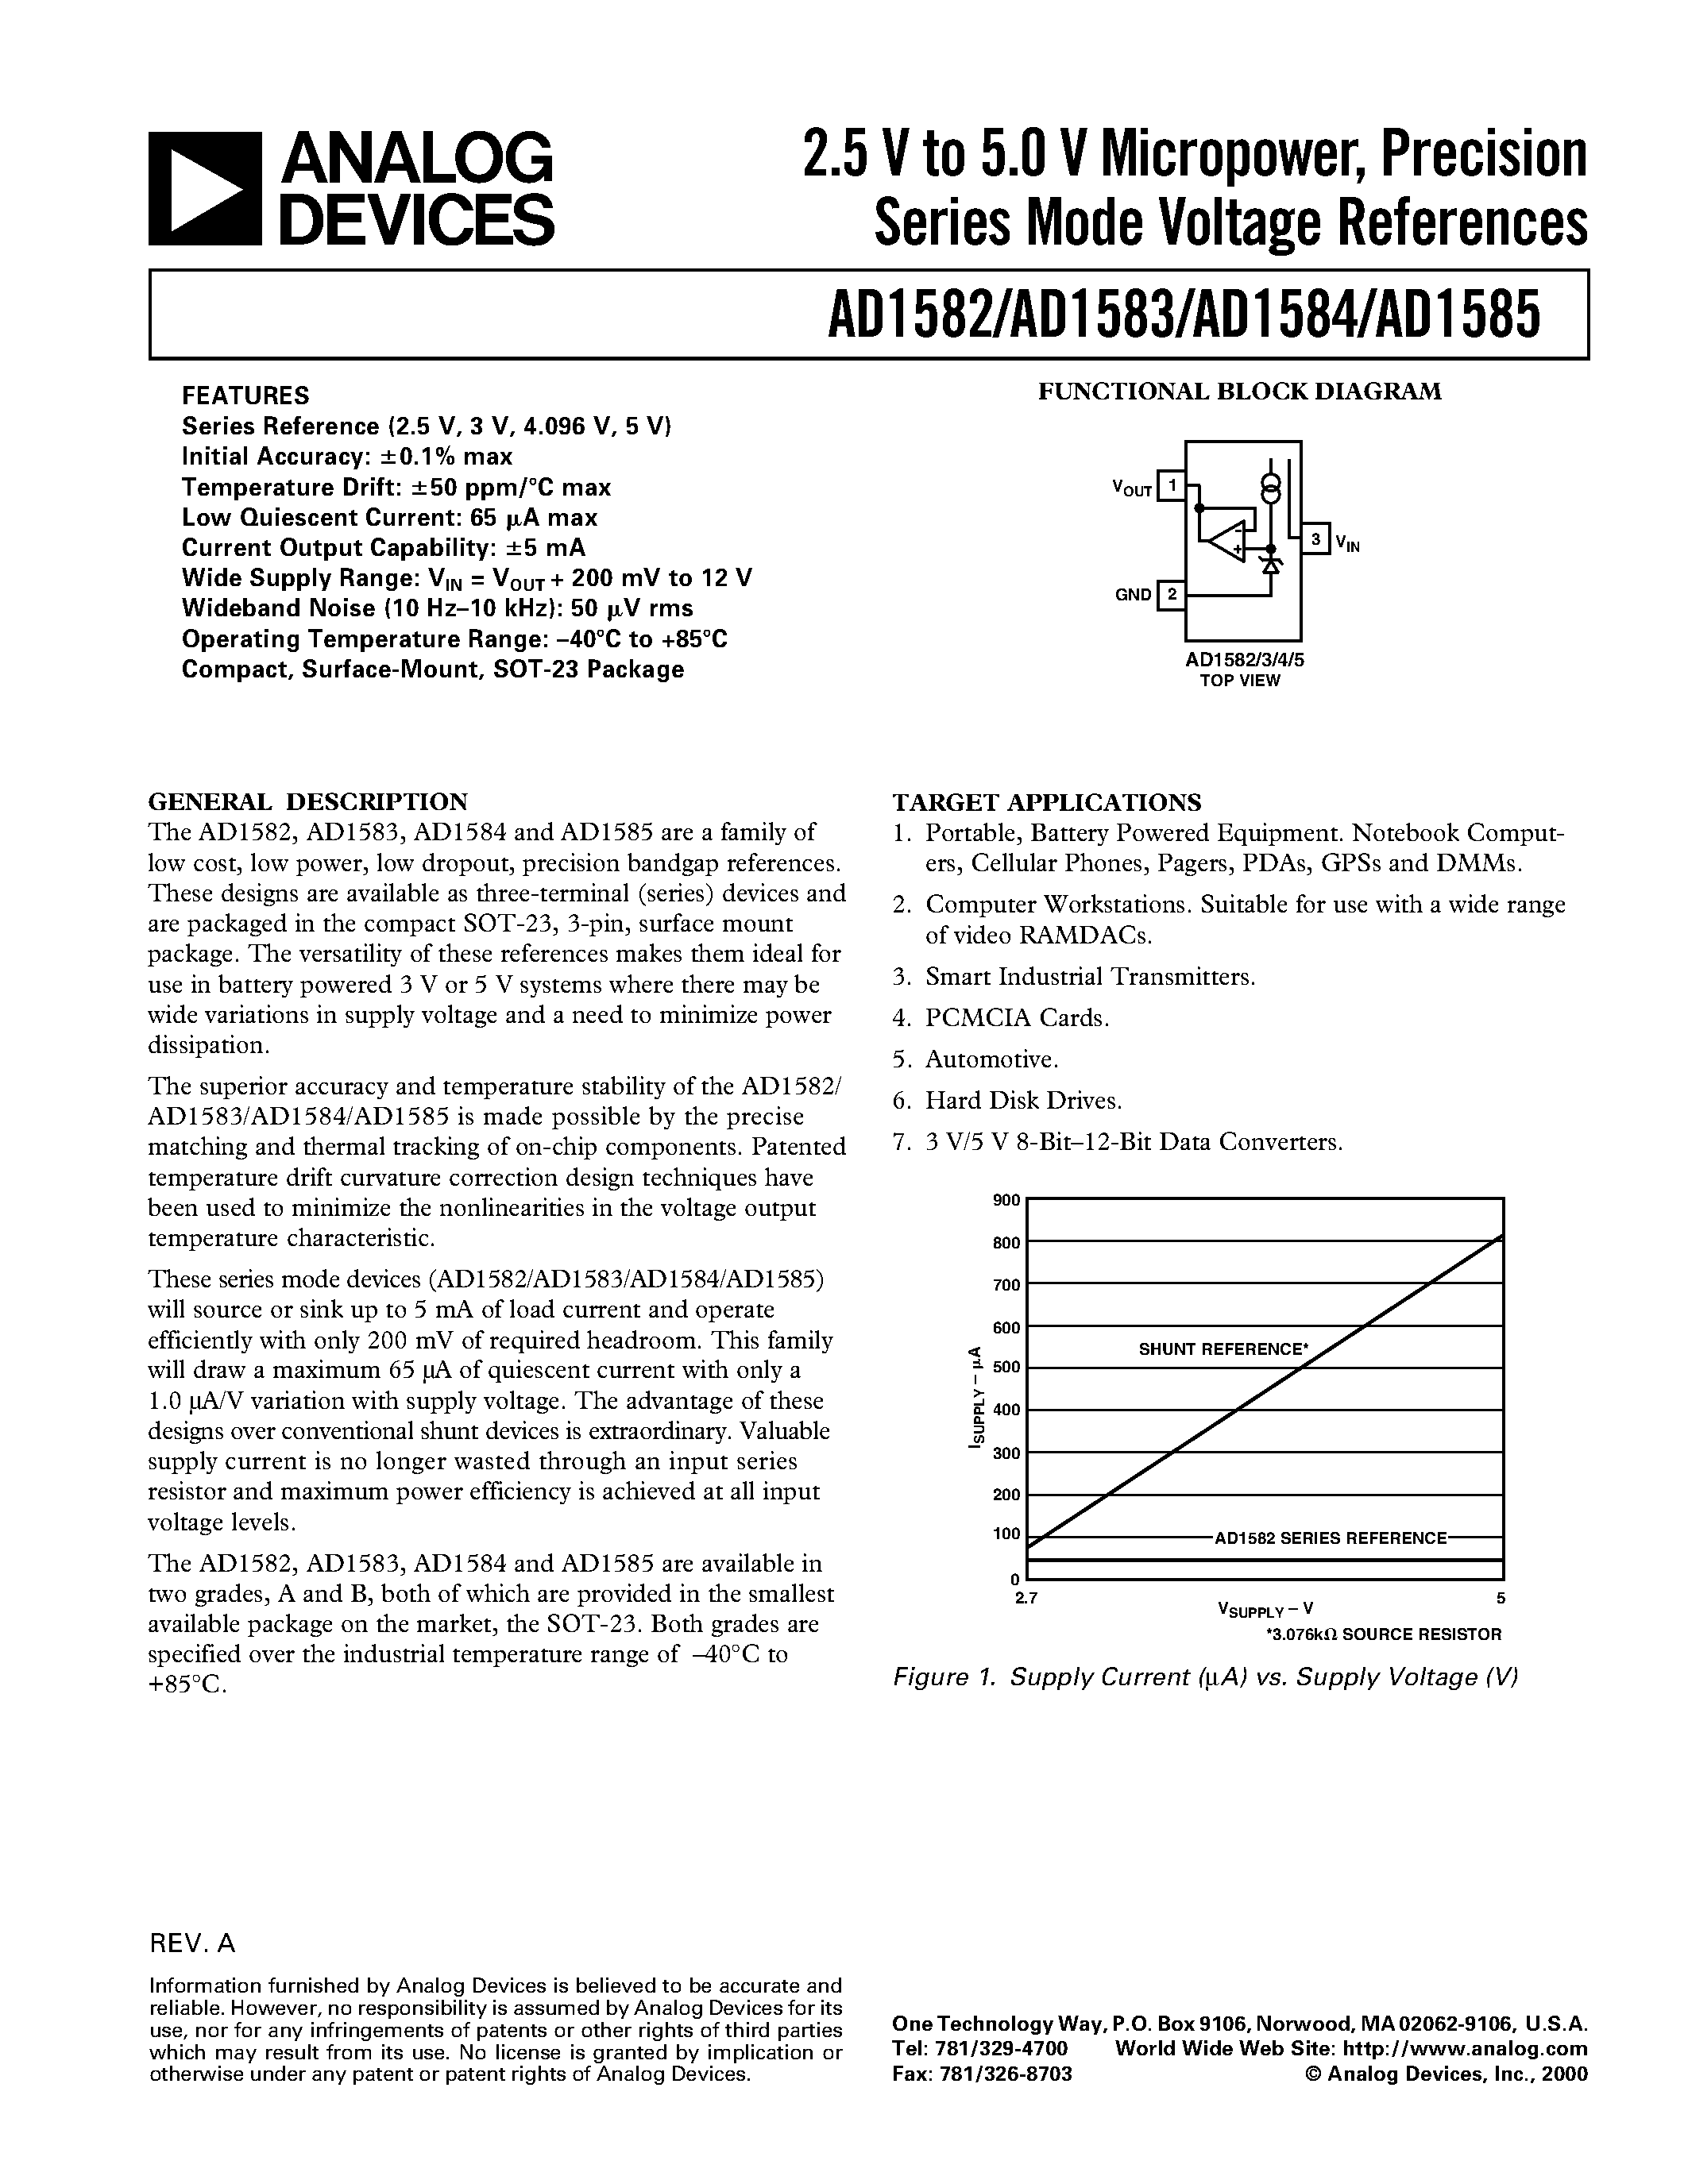 Datasheet AD1583A - 2.5 V to 5.0 V Micropower/ Precision Series Mode Voltage References page 1